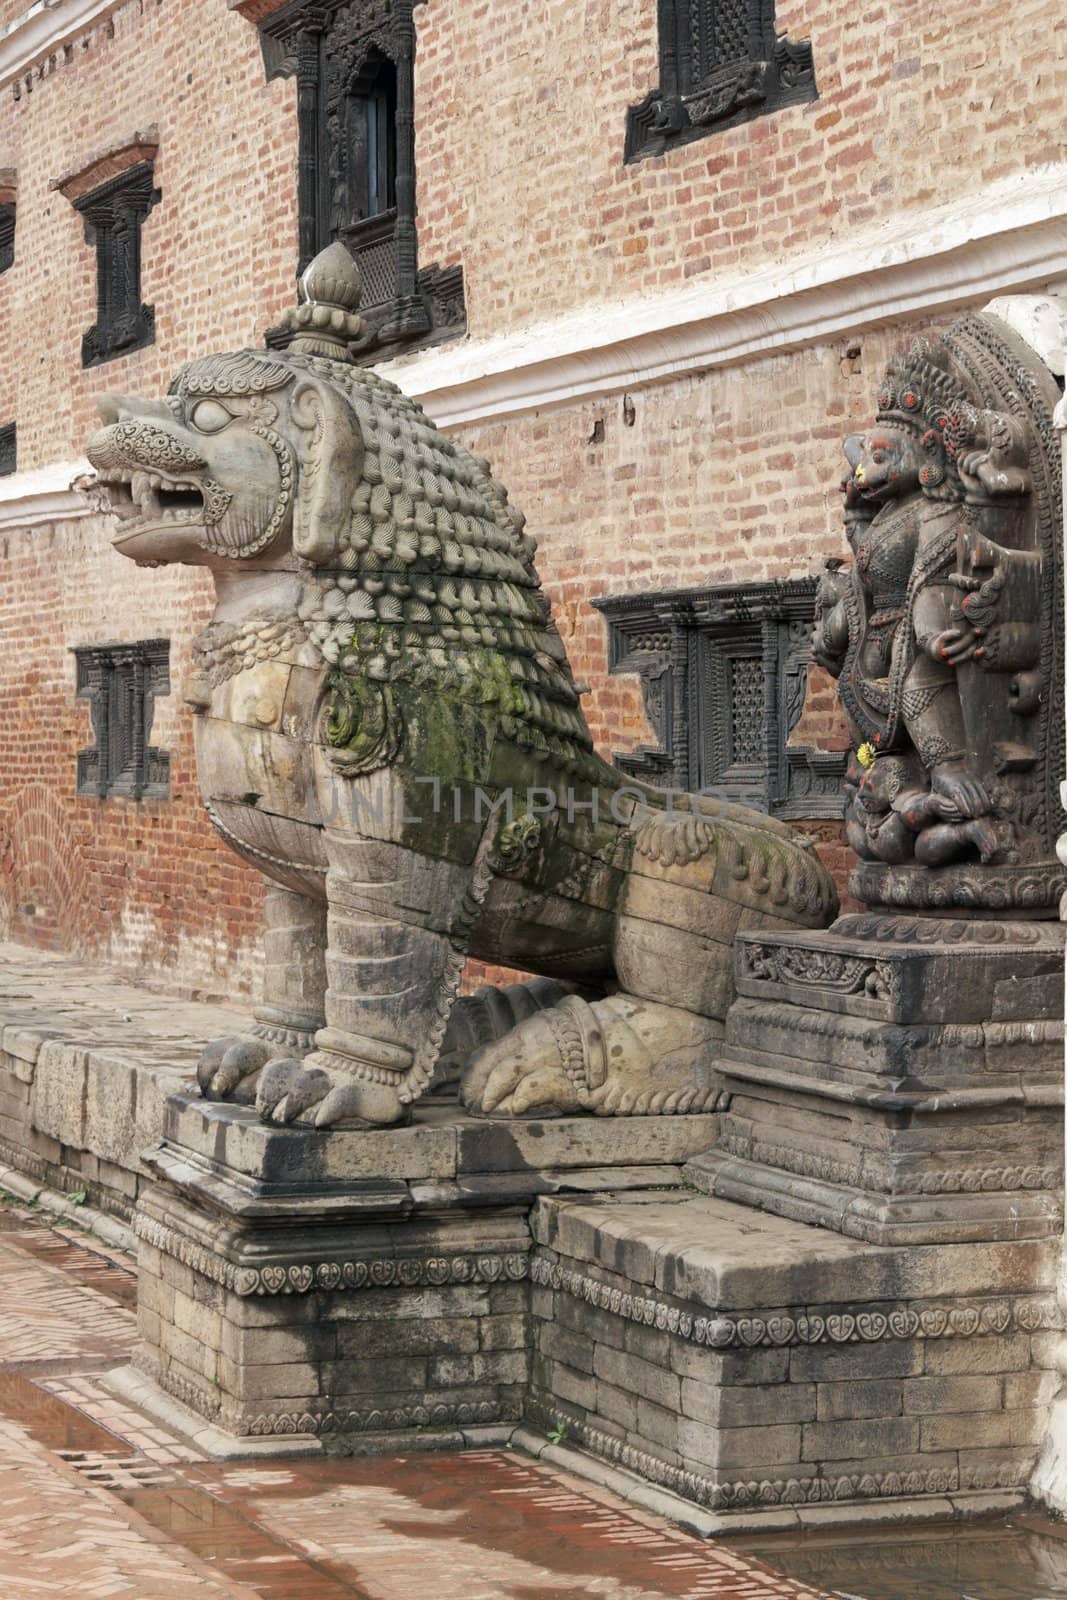 Statue of mythical beast guarding the entrance to the Royal Palace in the Durbar Square, Bhaktapur, Nepal